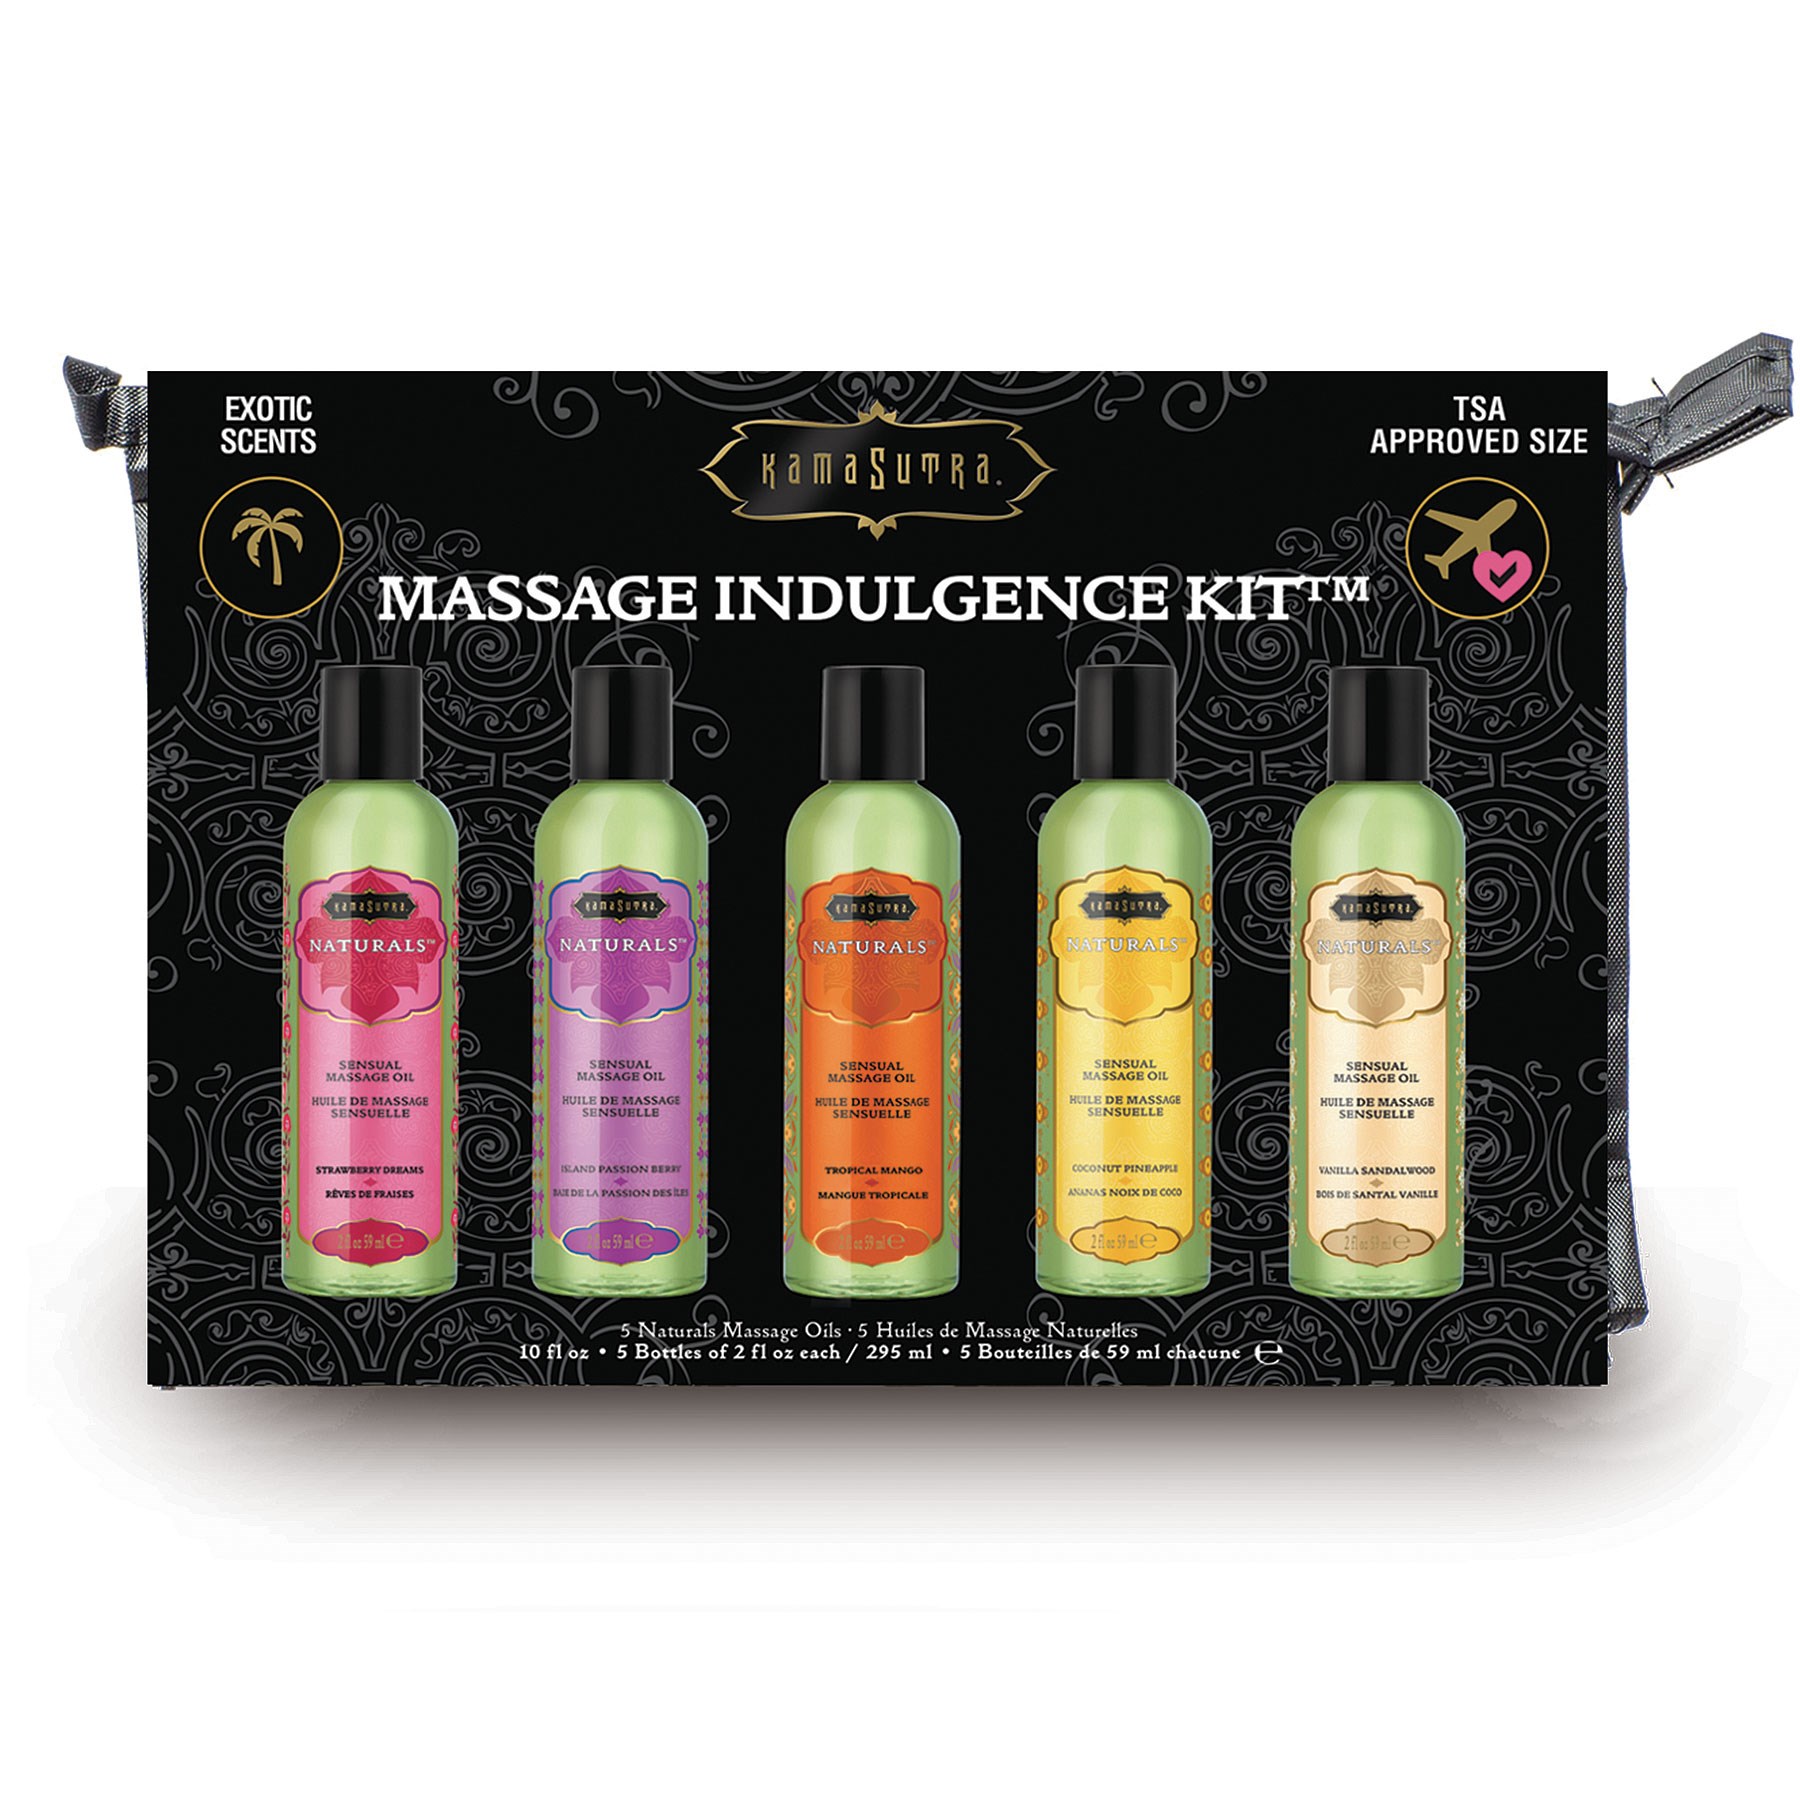 Kama Sutra Massage Indulgence in box packaging on table